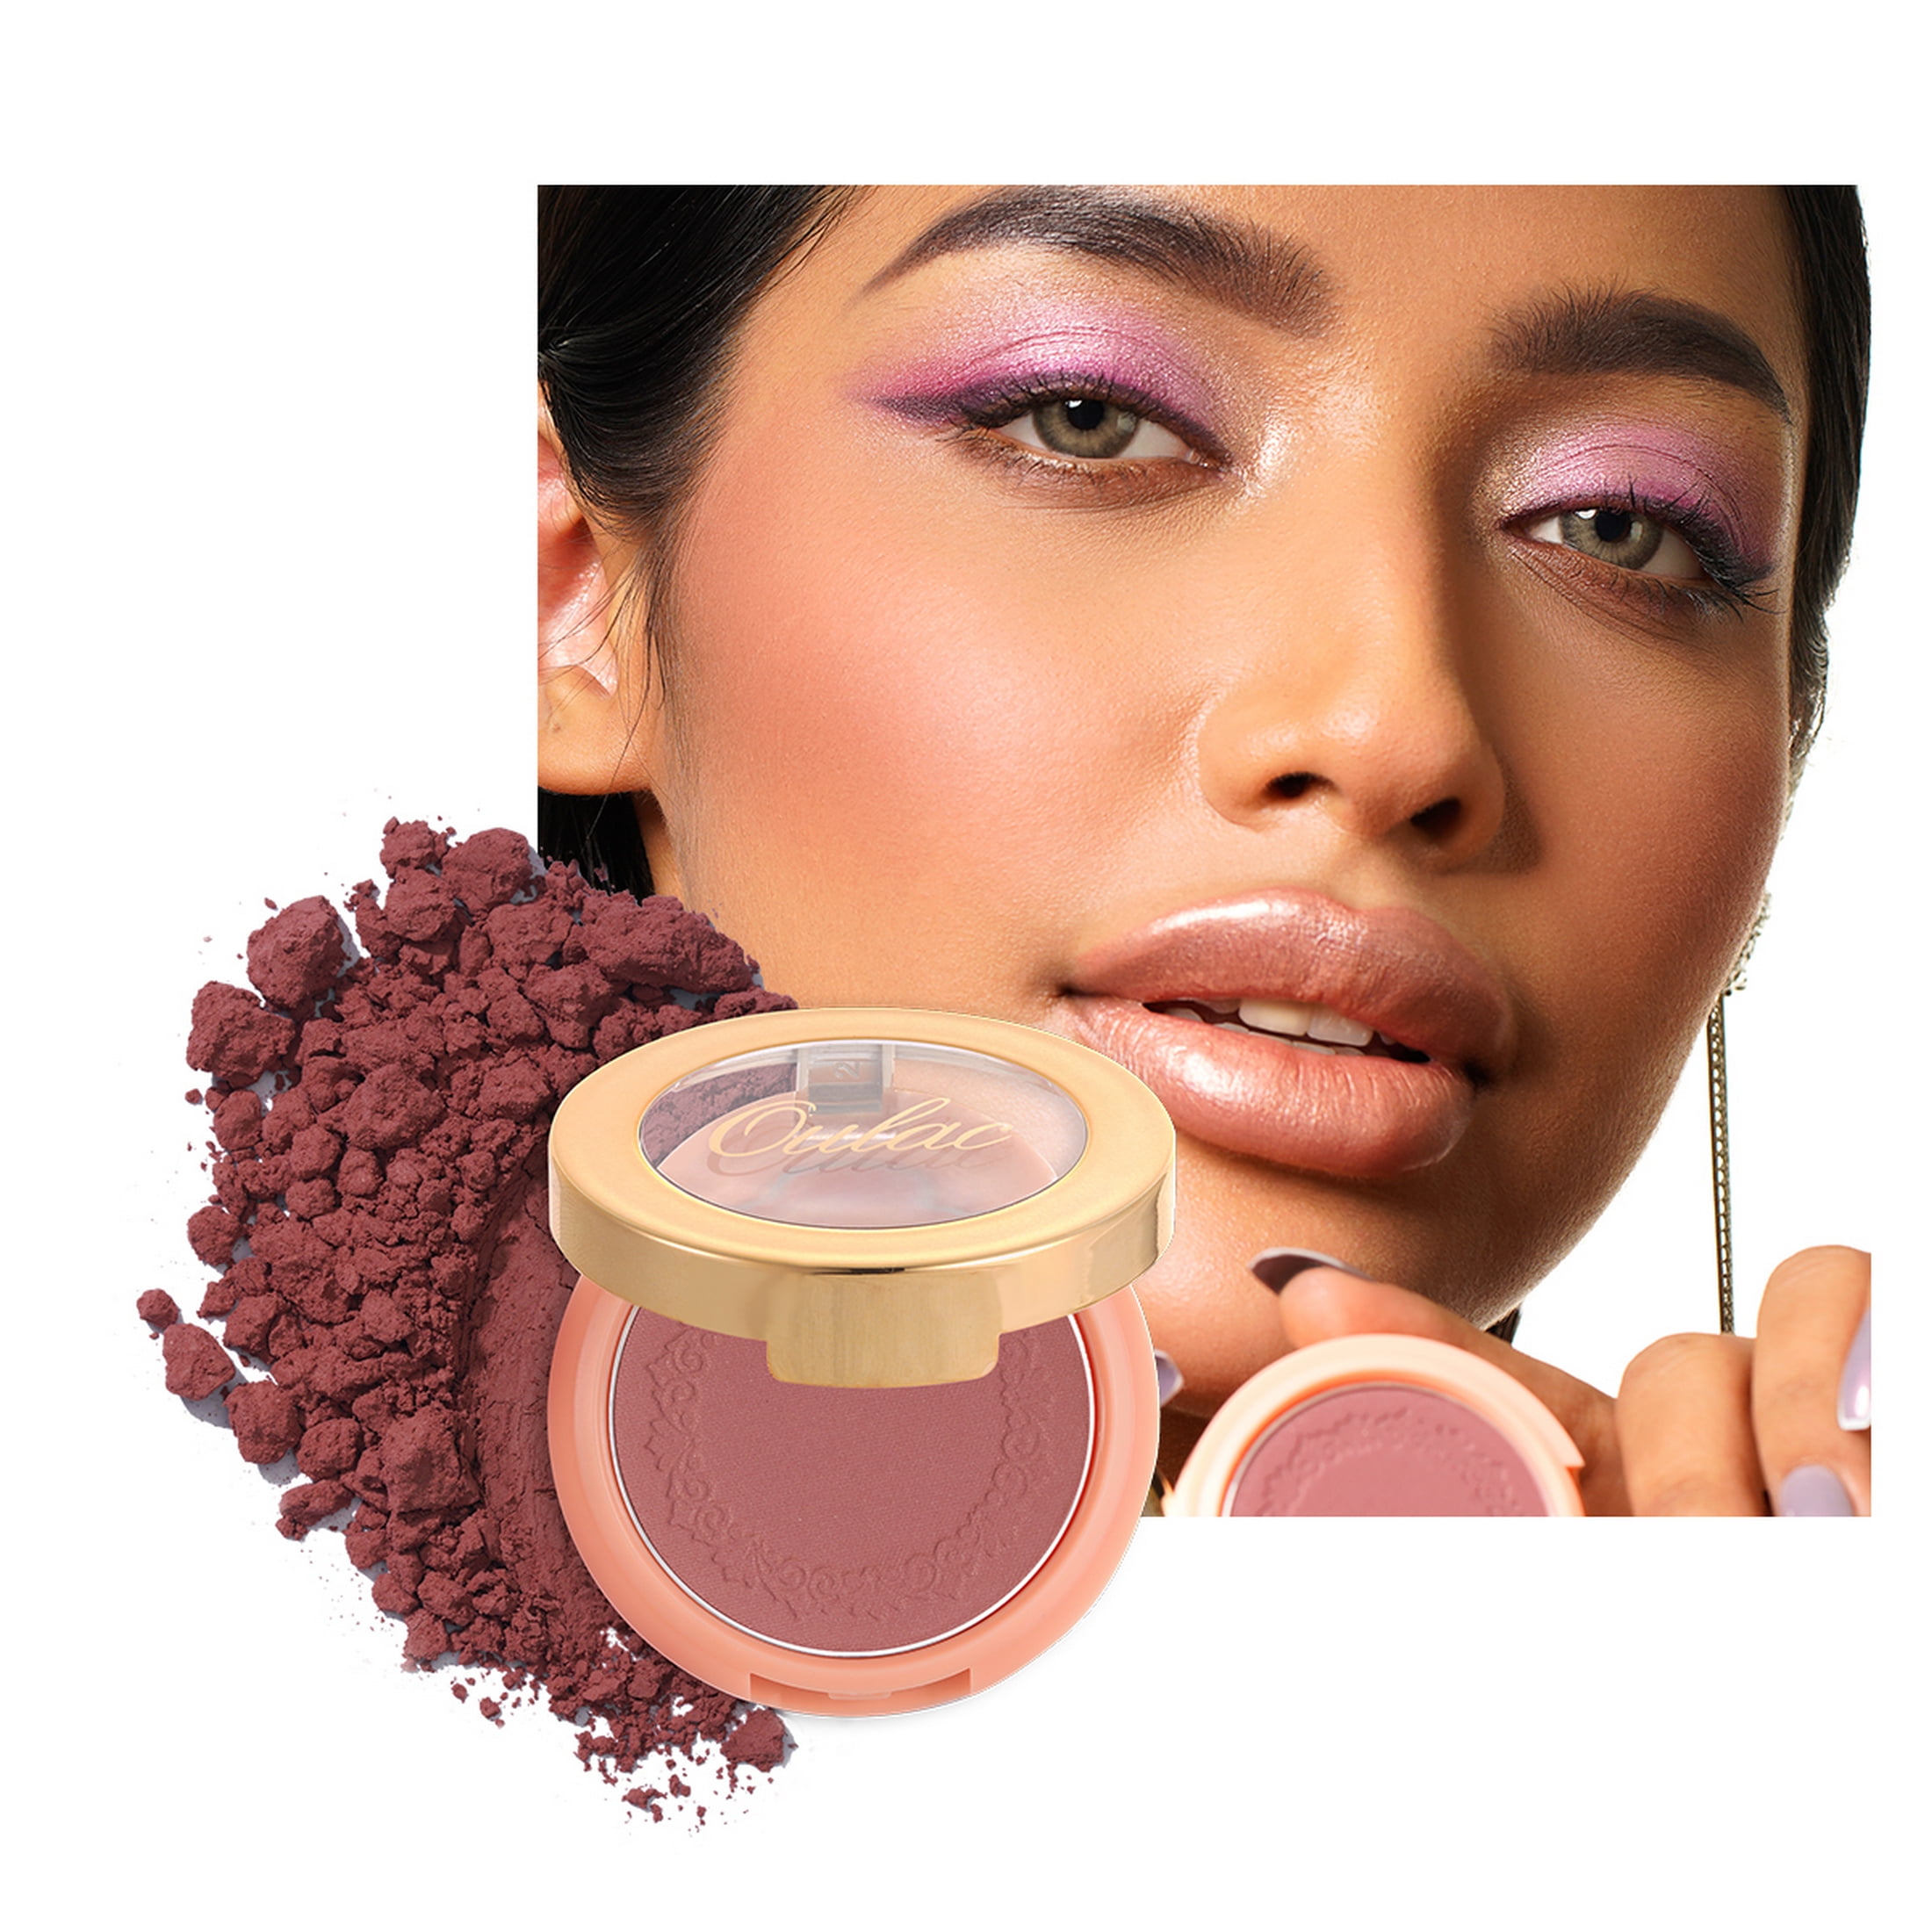  Oulac Baby Pink Blush Makeup, Highly Pigmented Cream Blush, Natural Matte Glow, Shape & Highlight Face, Cruelty-Free Vegan Blush